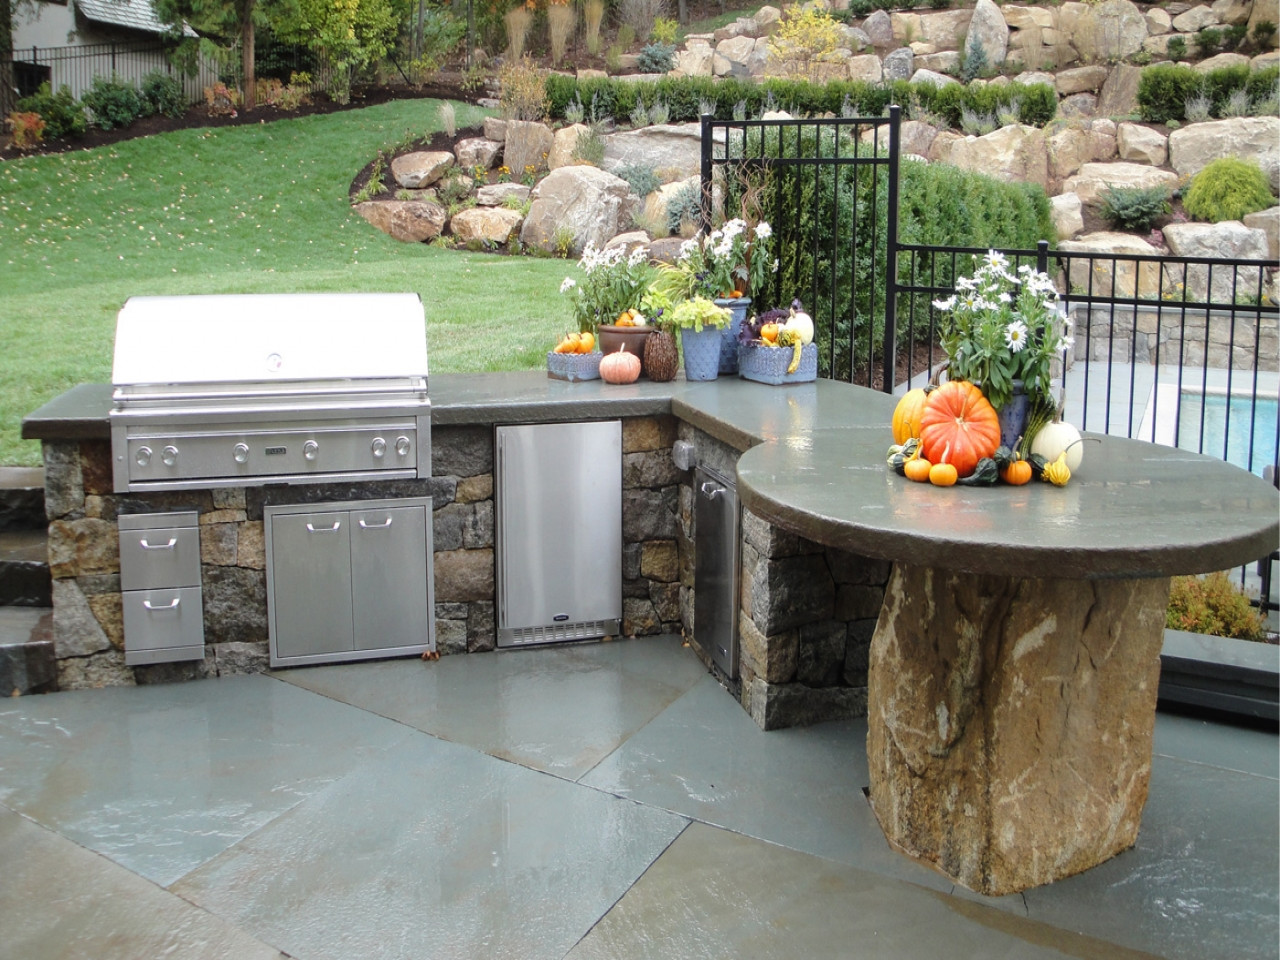 Lowes Outdoor Kitchen Grills
 Outdoor kitchen lowes best suited to offer you top notch